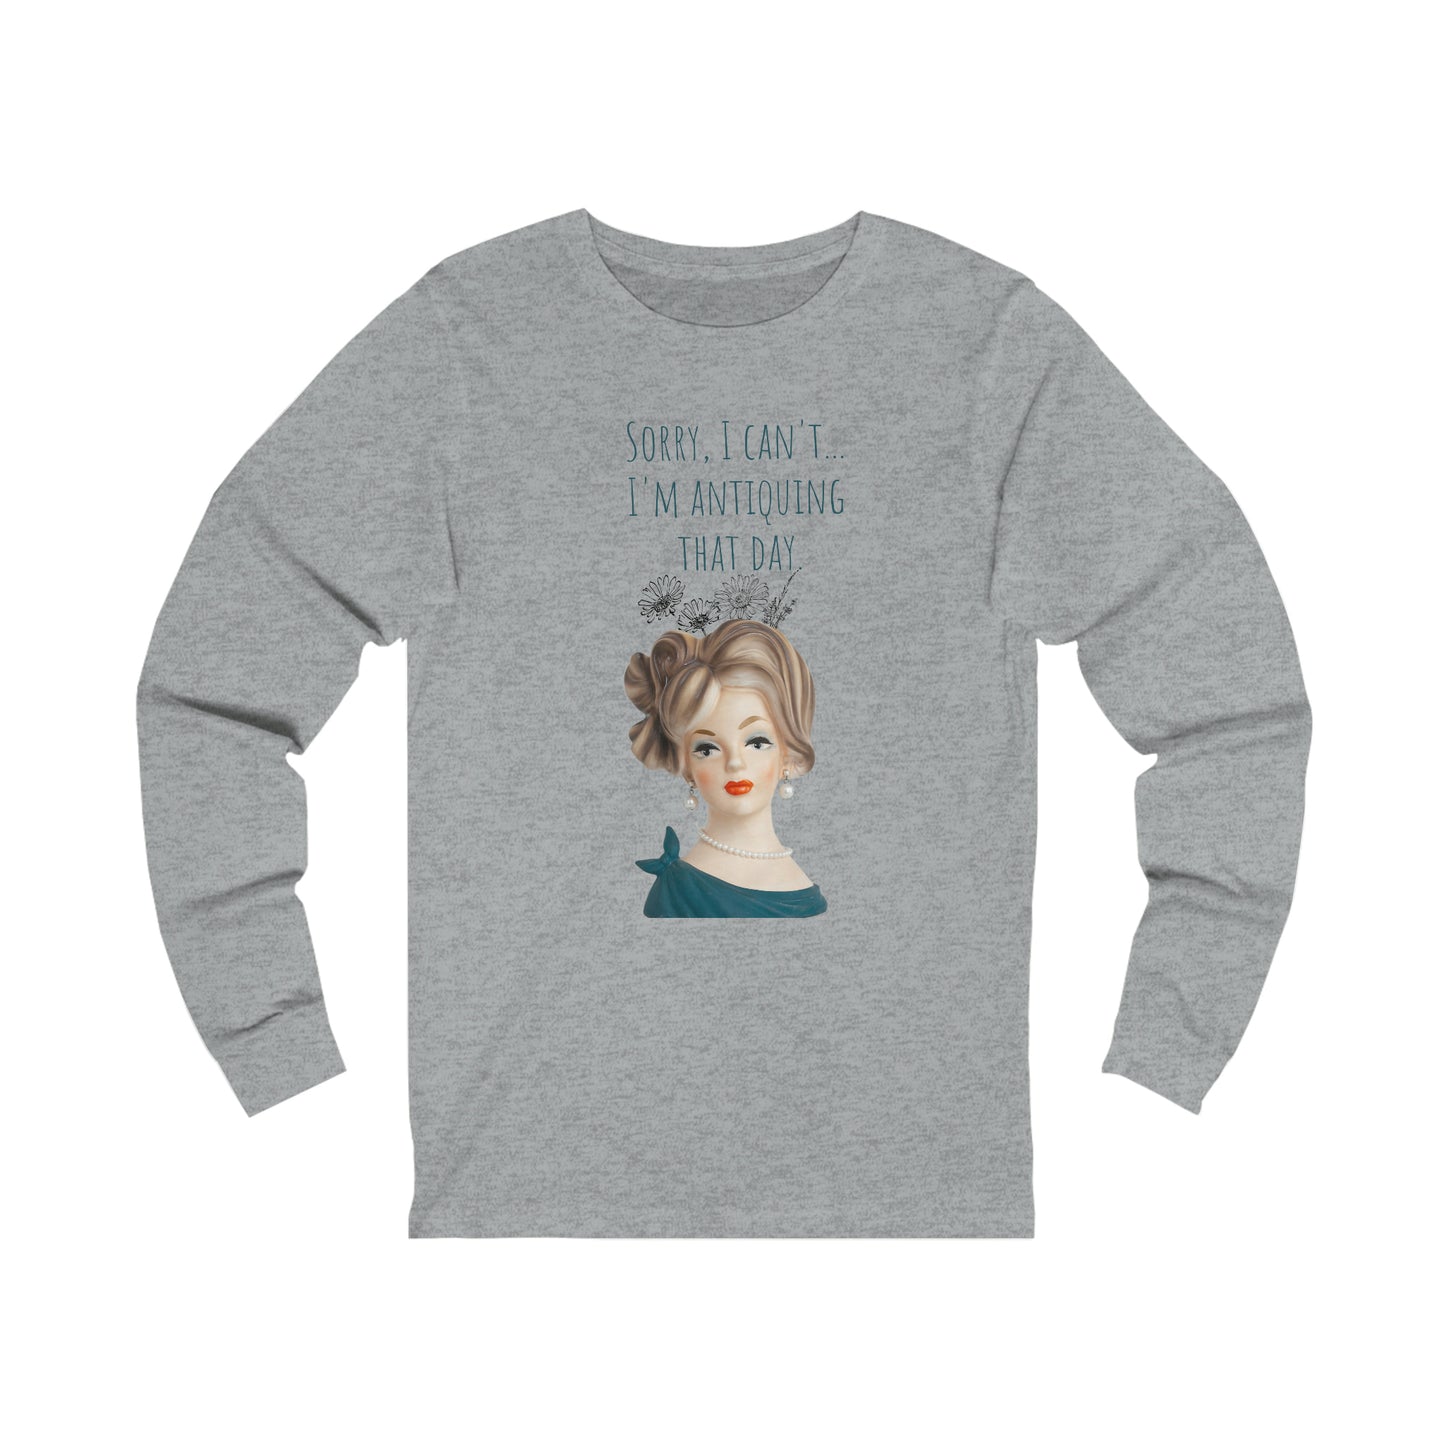 Lady Head Vase Shirt - Sorry, I can't. I am antiquing that day. -Unisex Jersey Long Sleeve Tee